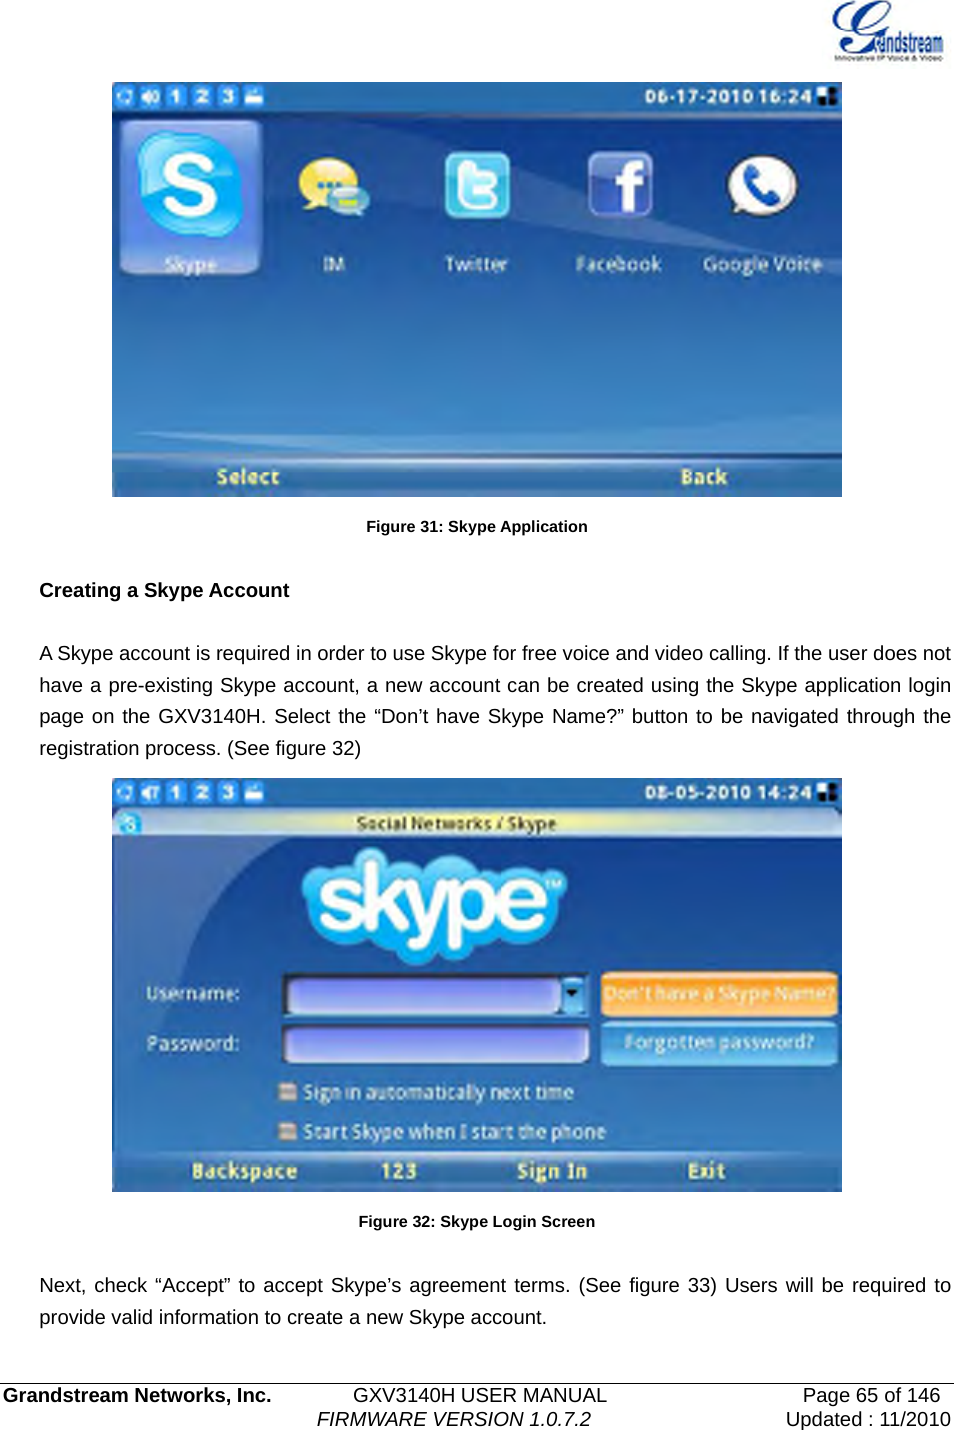   Grandstream Networks, Inc.        GXV3140H USER MANUAL                  Page 65 of 146                                FIRMWARE VERSION 1.0.7.2 Updated : 11/2010   Figure 31: Skype Application  Creating a Skype Account  A Skype account is required in order to use Skype for free voice and video calling. If the user does not have a pre-existing Skype account, a new account can be created using the Skype application login page on the GXV3140H. Select the “Don’t have Skype Name?” button to be navigated through the registration process. (See figure 32)    Figure 32: Skype Login Screen  Next, check “Accept” to accept Skype’s agreement terms. (See figure 33) Users will be required to provide valid information to create a new Skype account. 